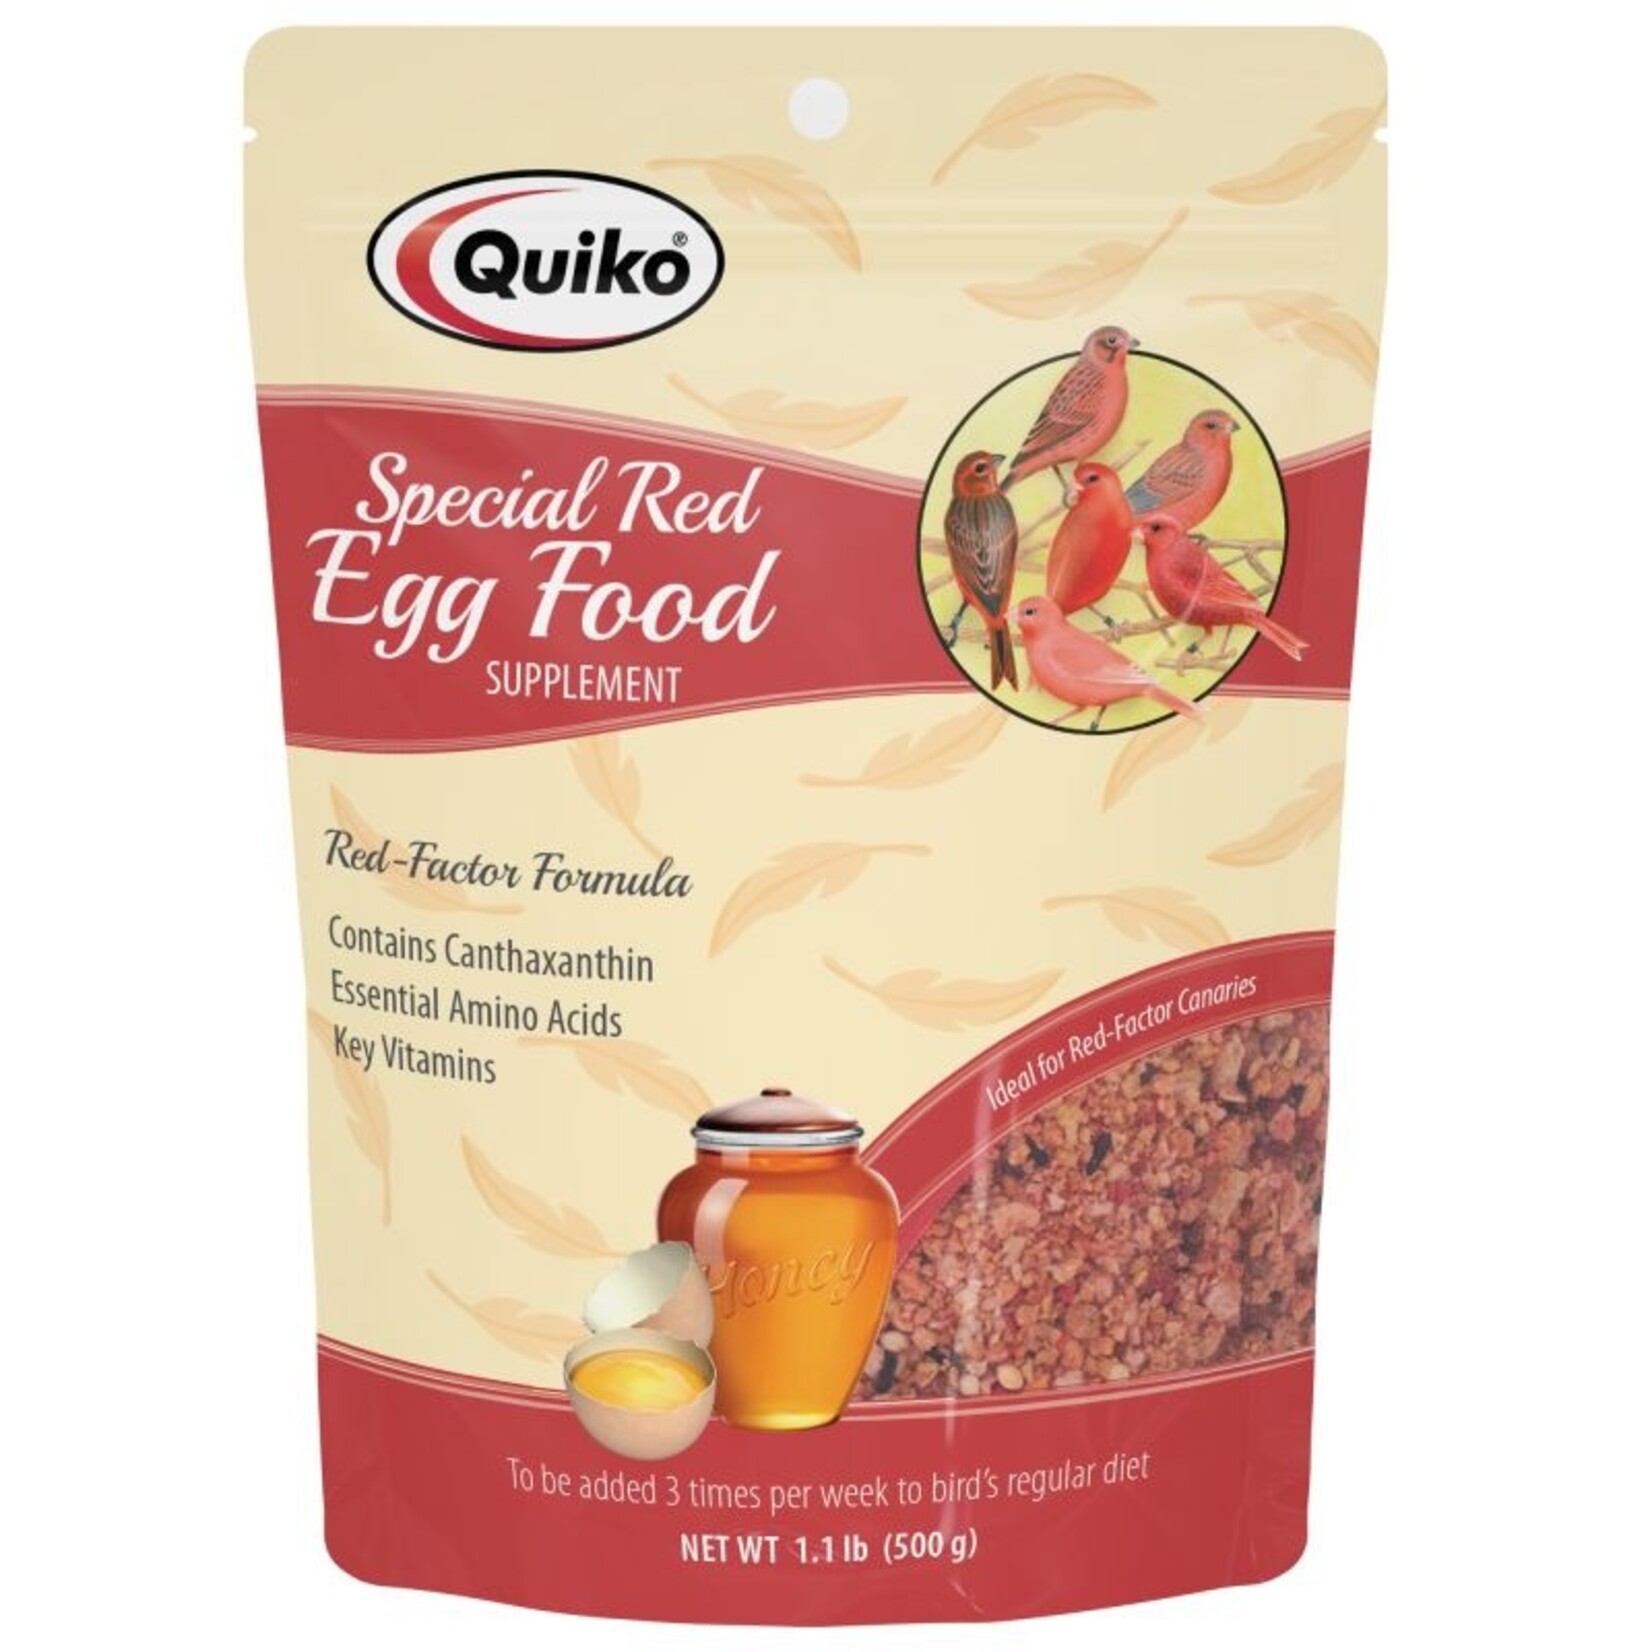 Quiko Special Red Egg Food Supplement, 1.1lb